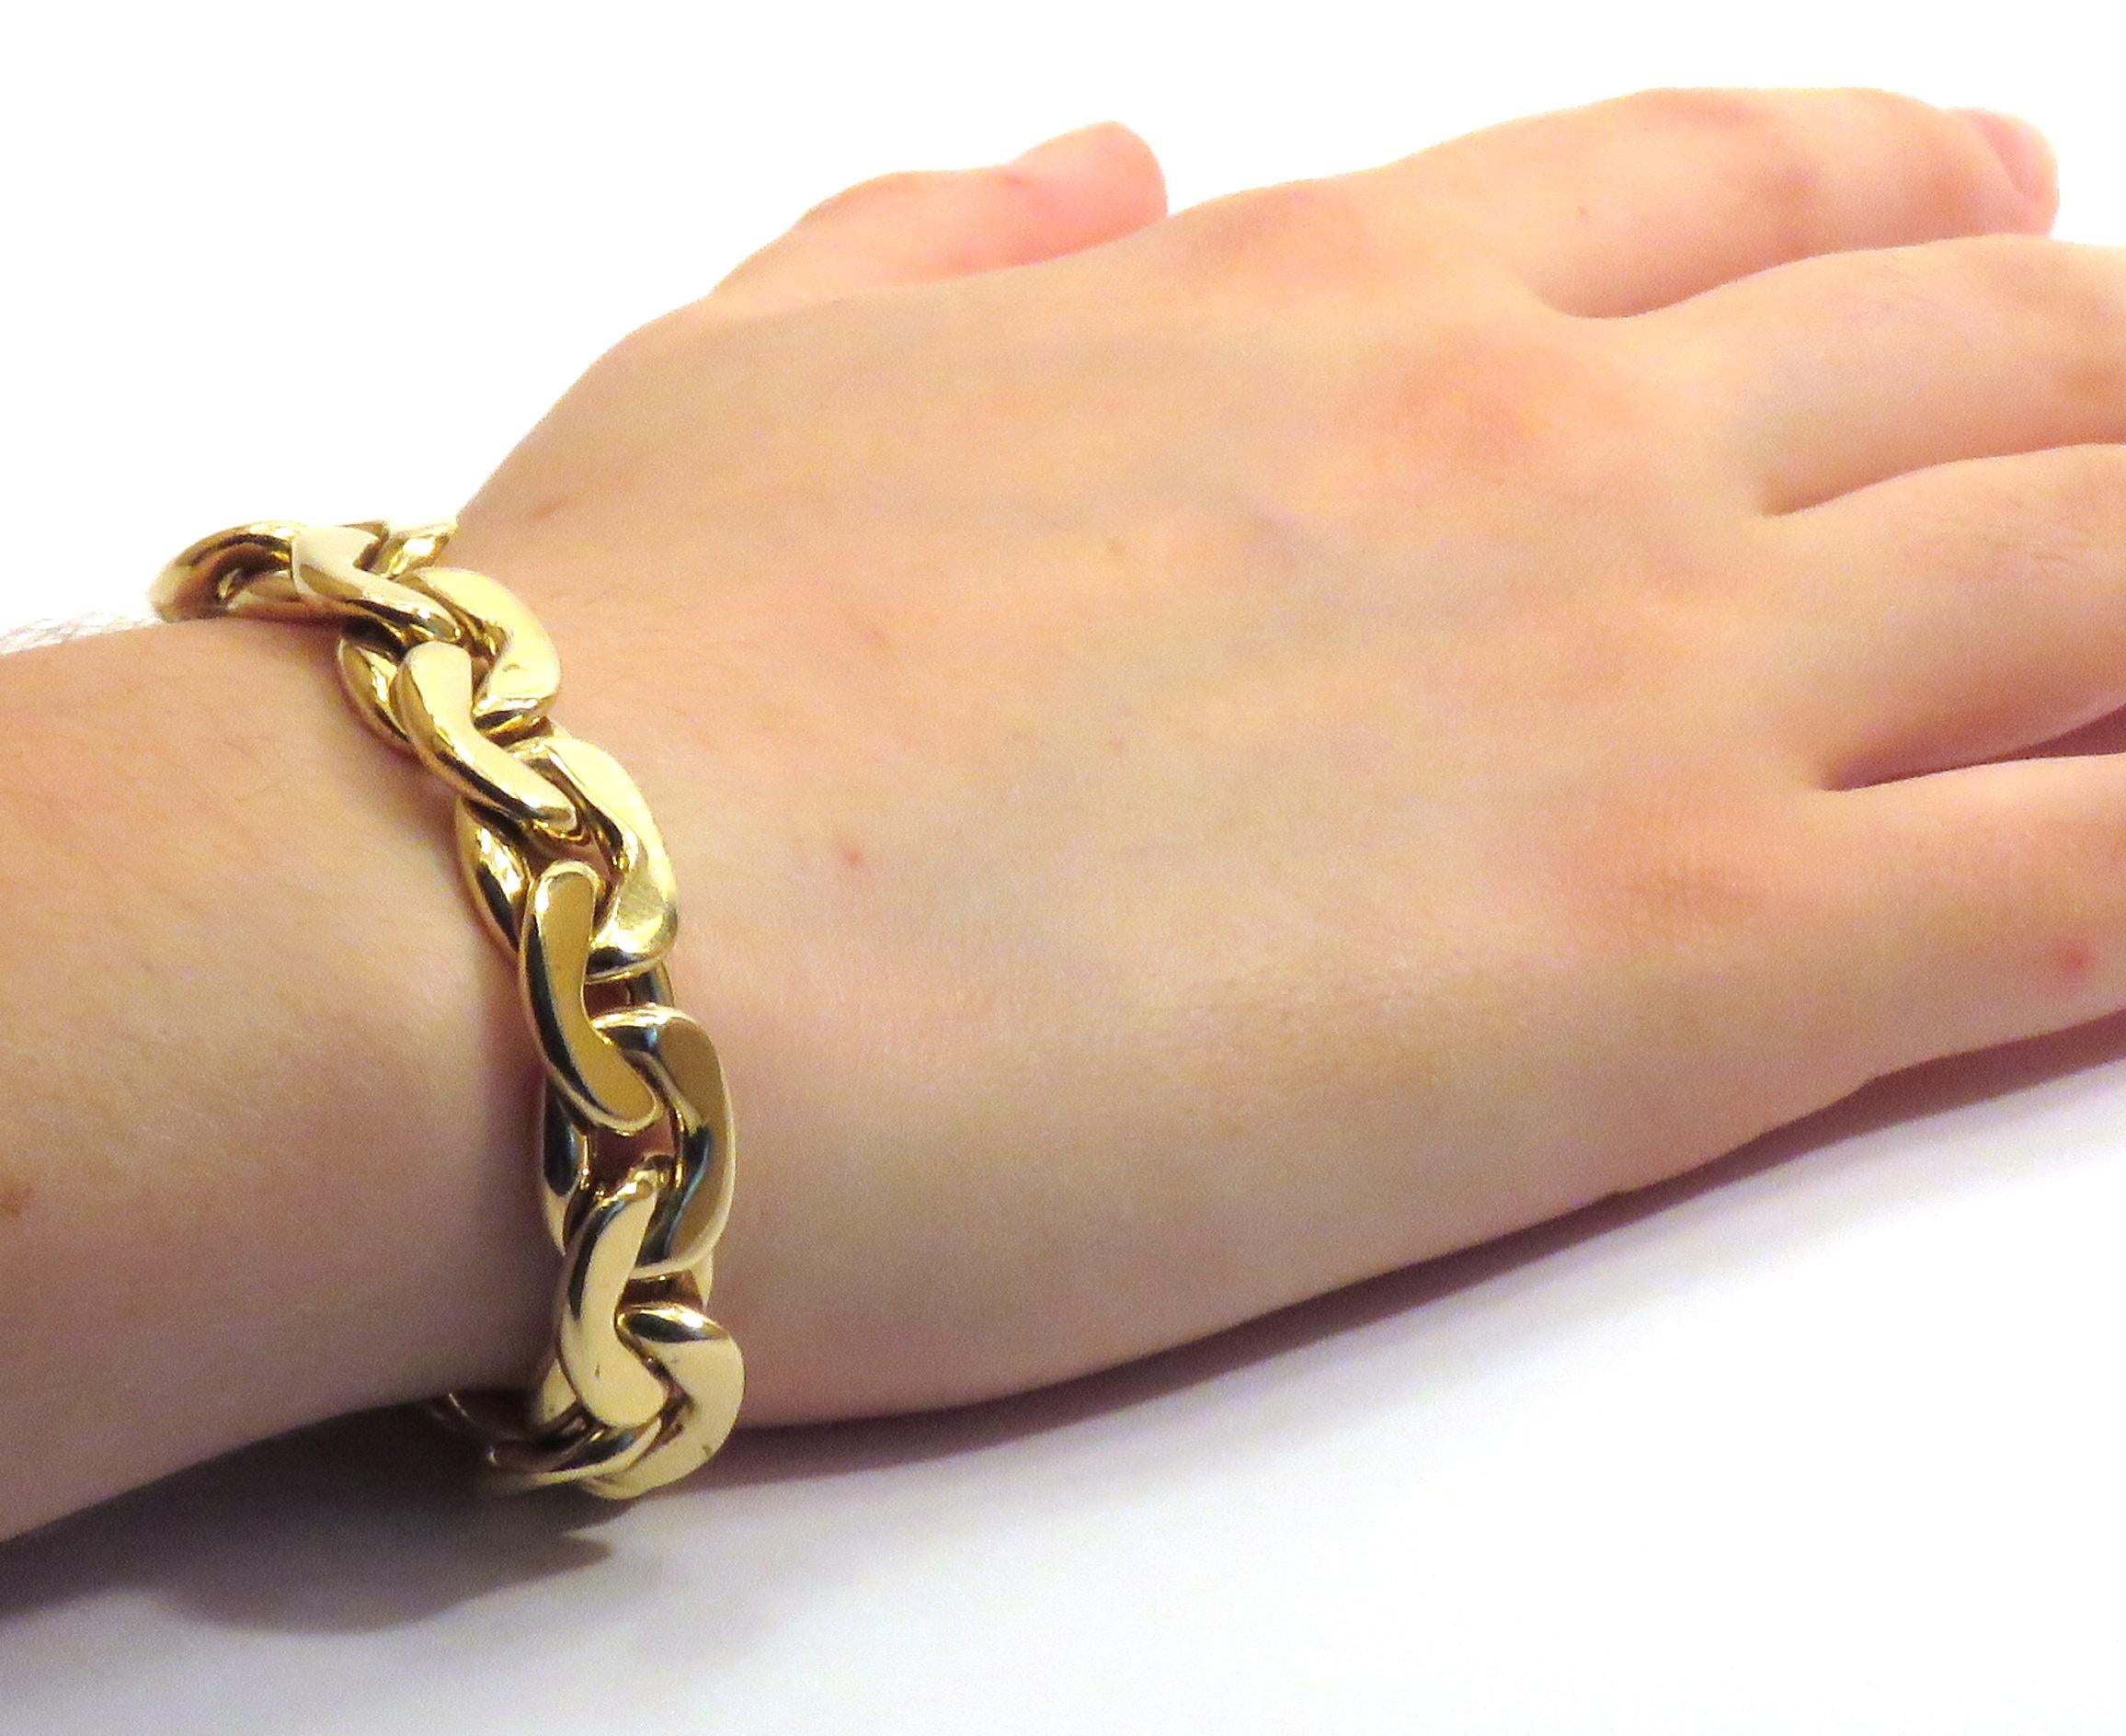 Contemporary 18 Karat Yellow Gold Groumette Bracelet Handcraft in Italy by Botta Gioielli For Sale